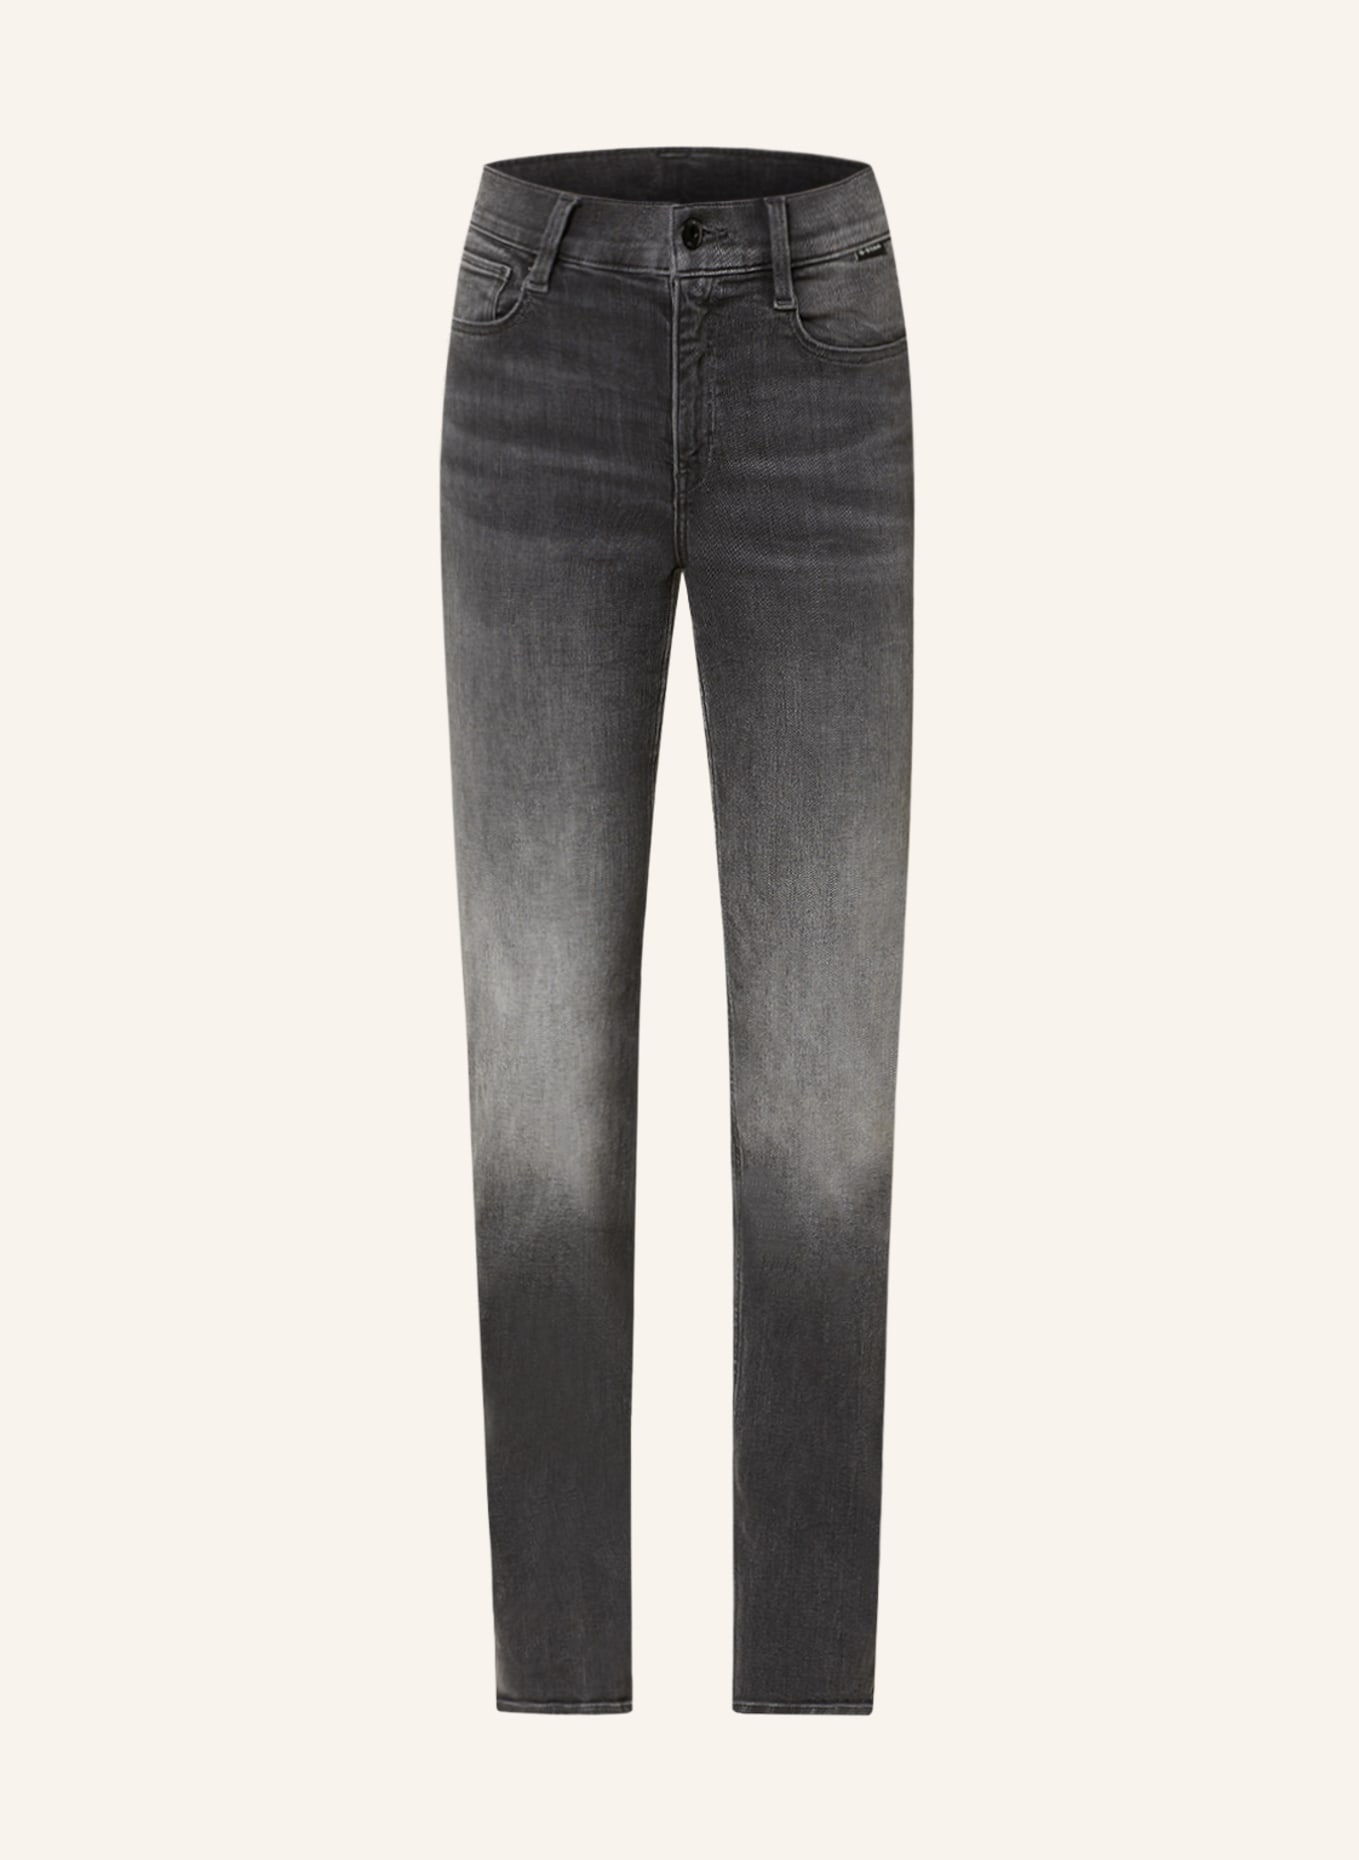 G-Star RAW Straight jeans, Color: G108 worn in black moon (Image 1)